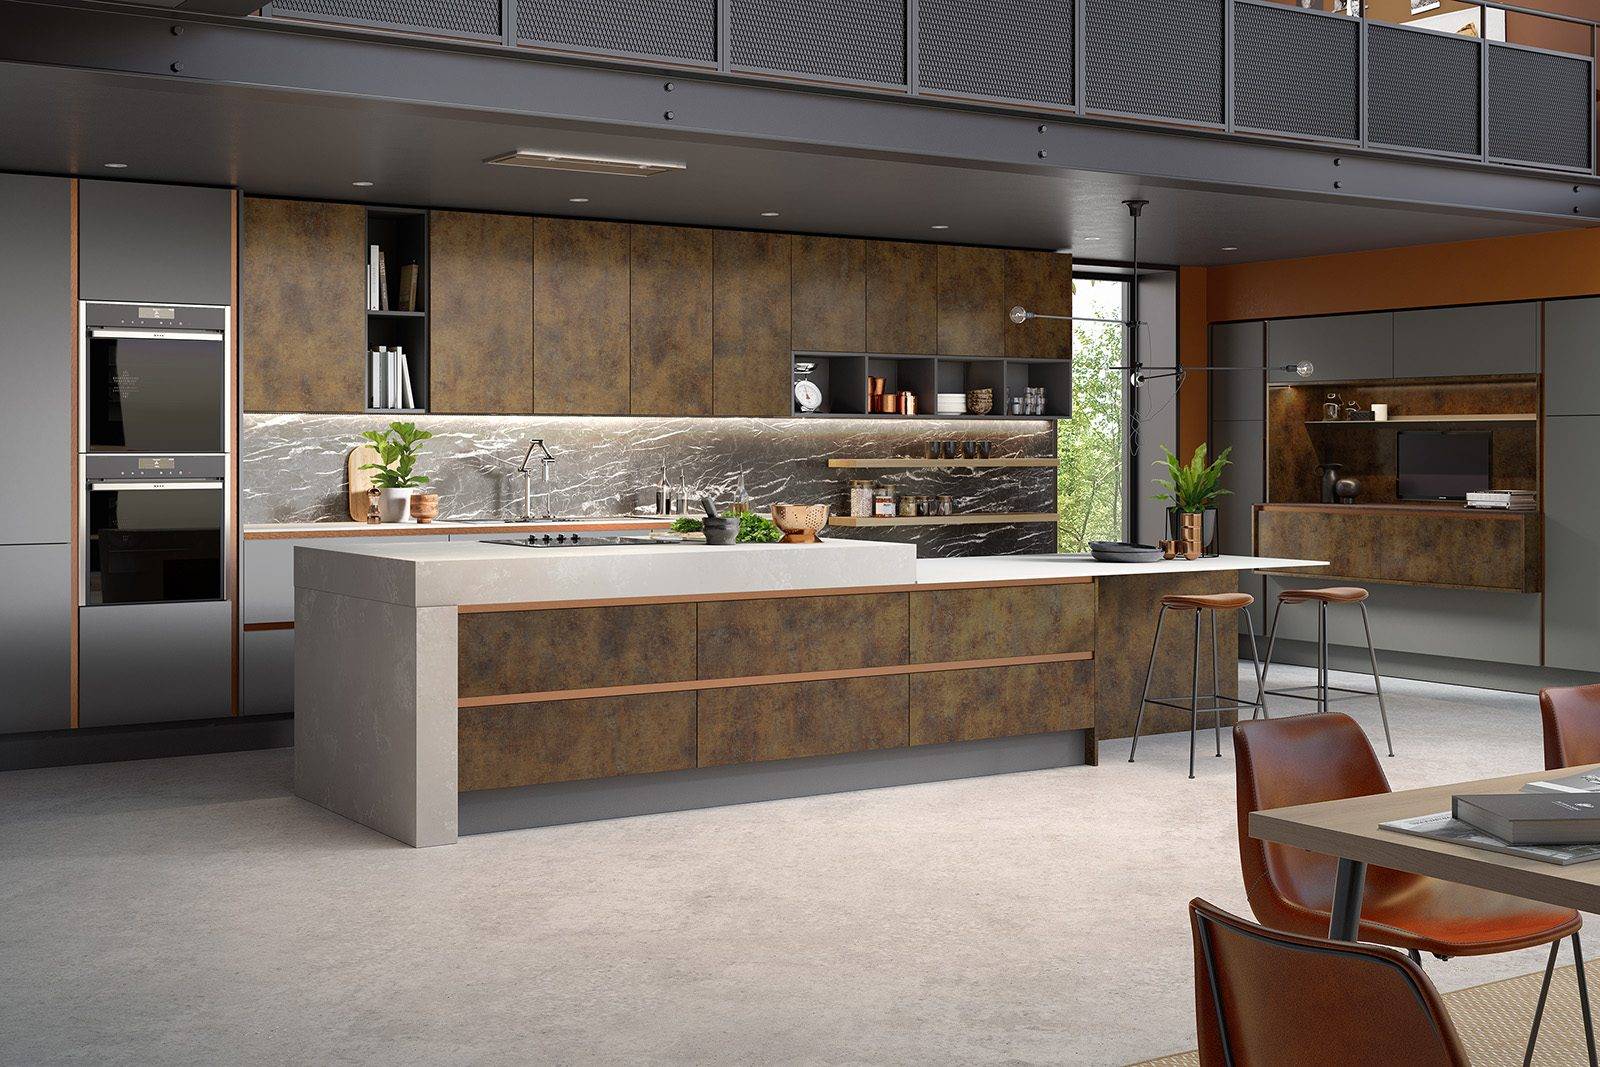 Inset Cube Copper Dusk Grey And Graphite | Net Kitchens, Walthamstow